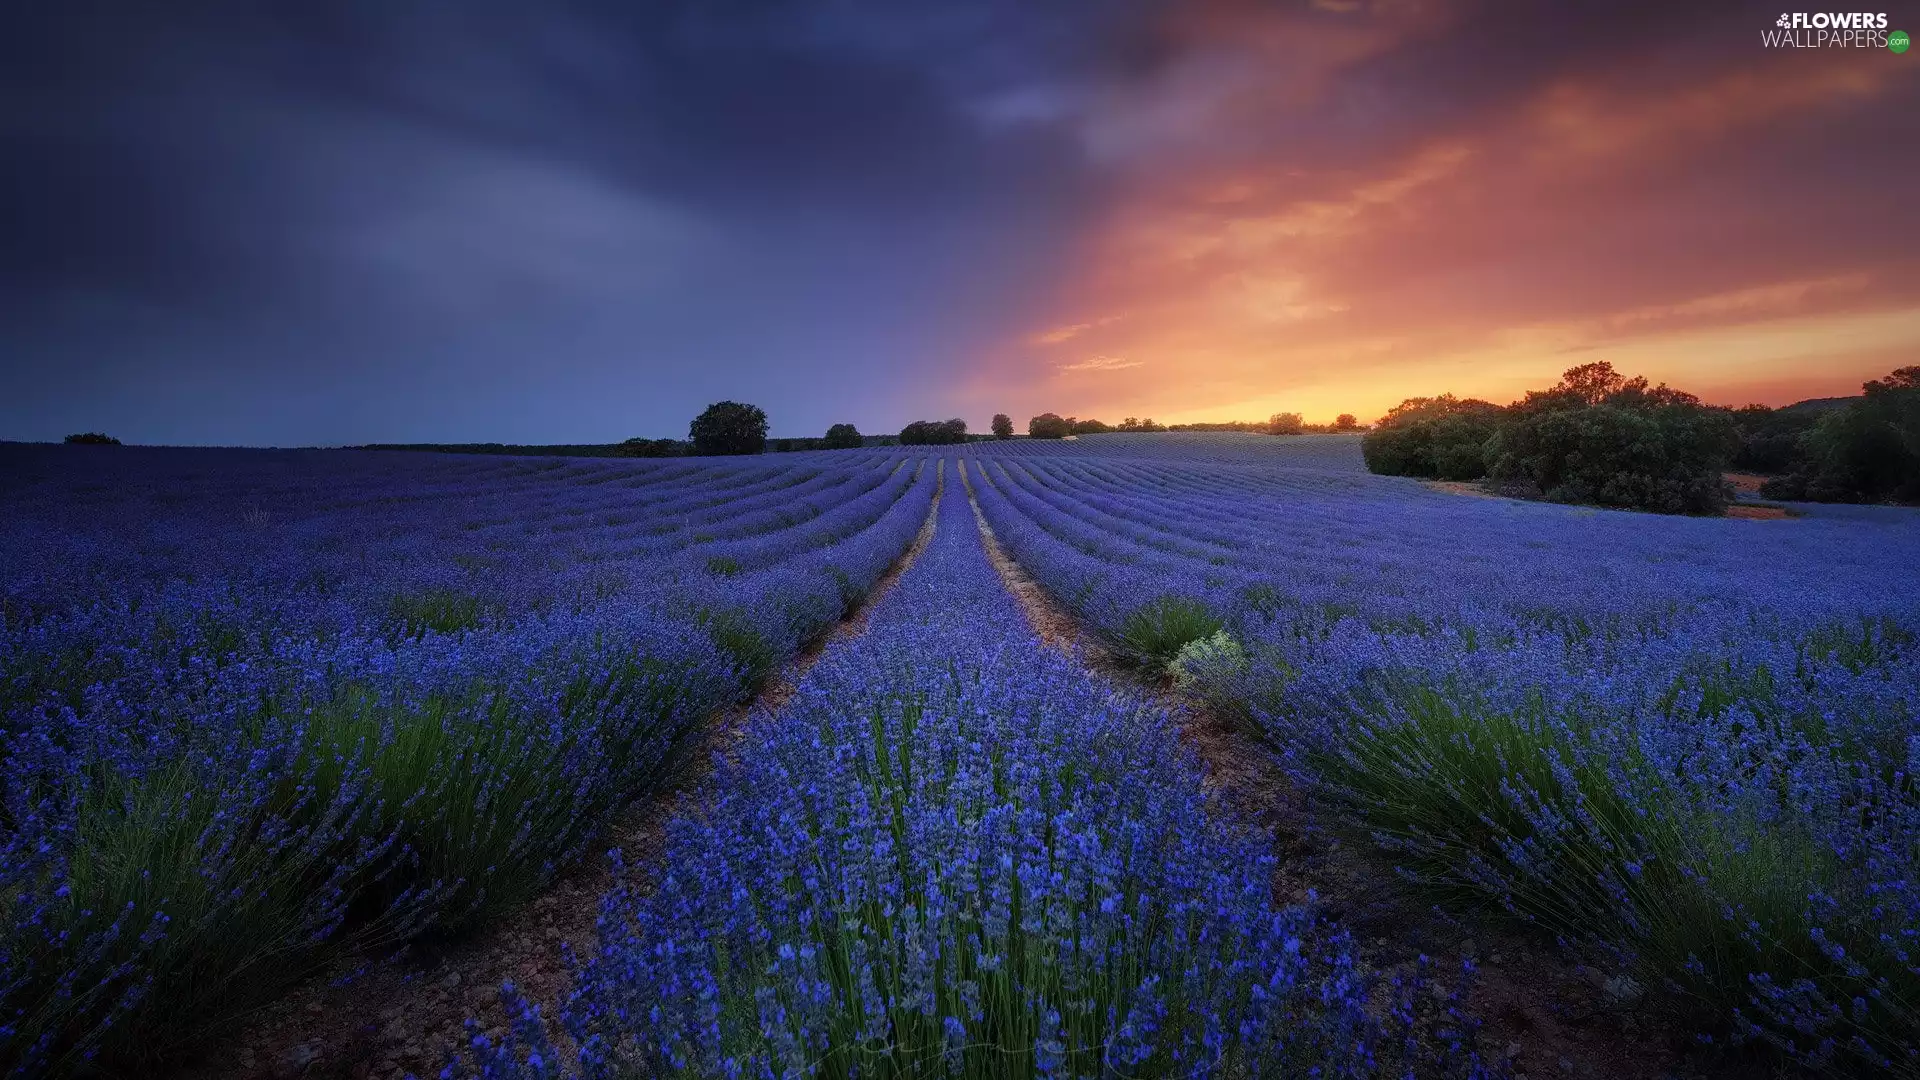 trees, Field, Great Sunsets, evening, viewes, lavender